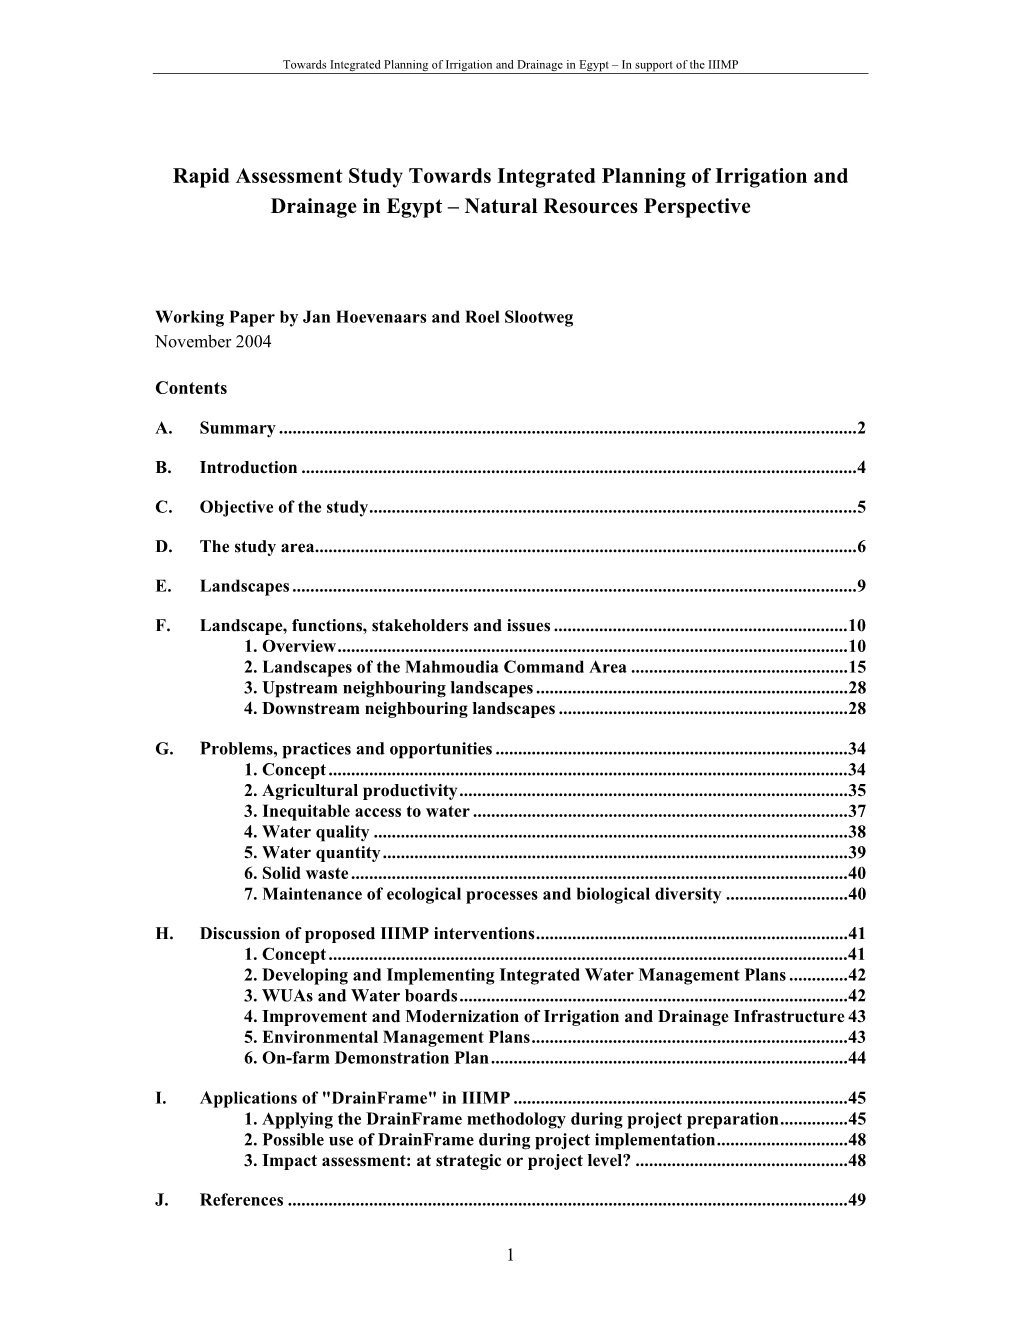 Rapid Assessment Study Towards Integrated Planning of Irrigation and Drainage in Egypt – Natural Resources Perspective